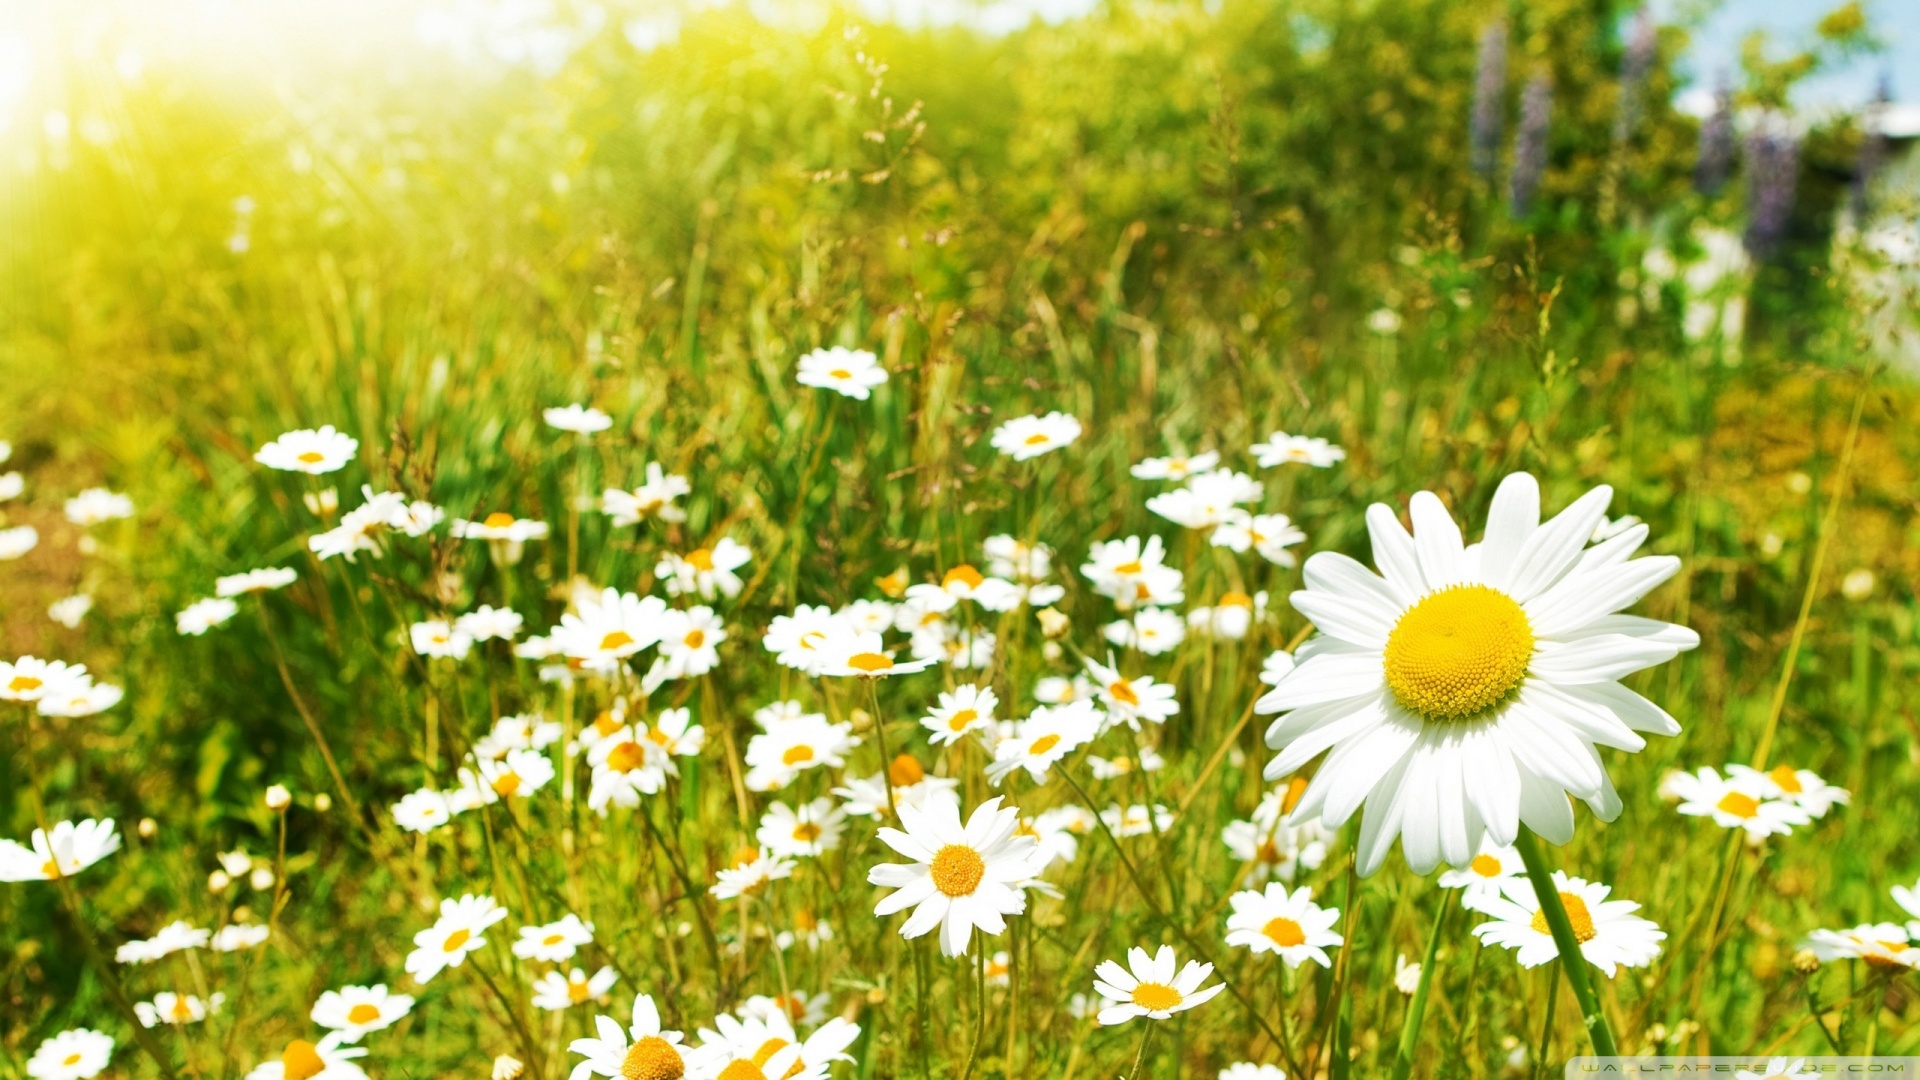 Wildflowers Sunny Day Wallpaper